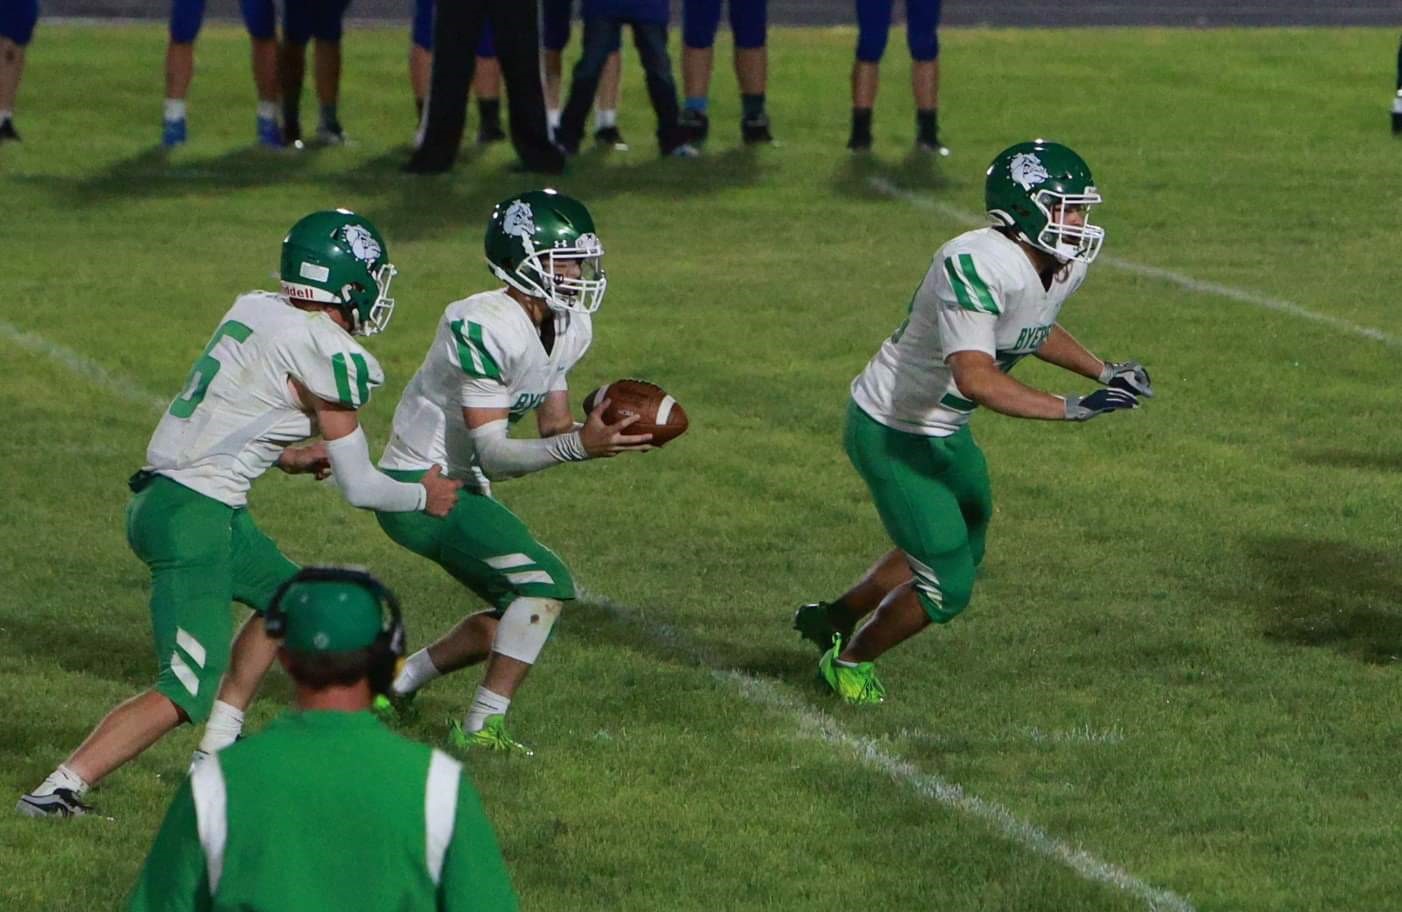 Byers Players running the ball back in Akron